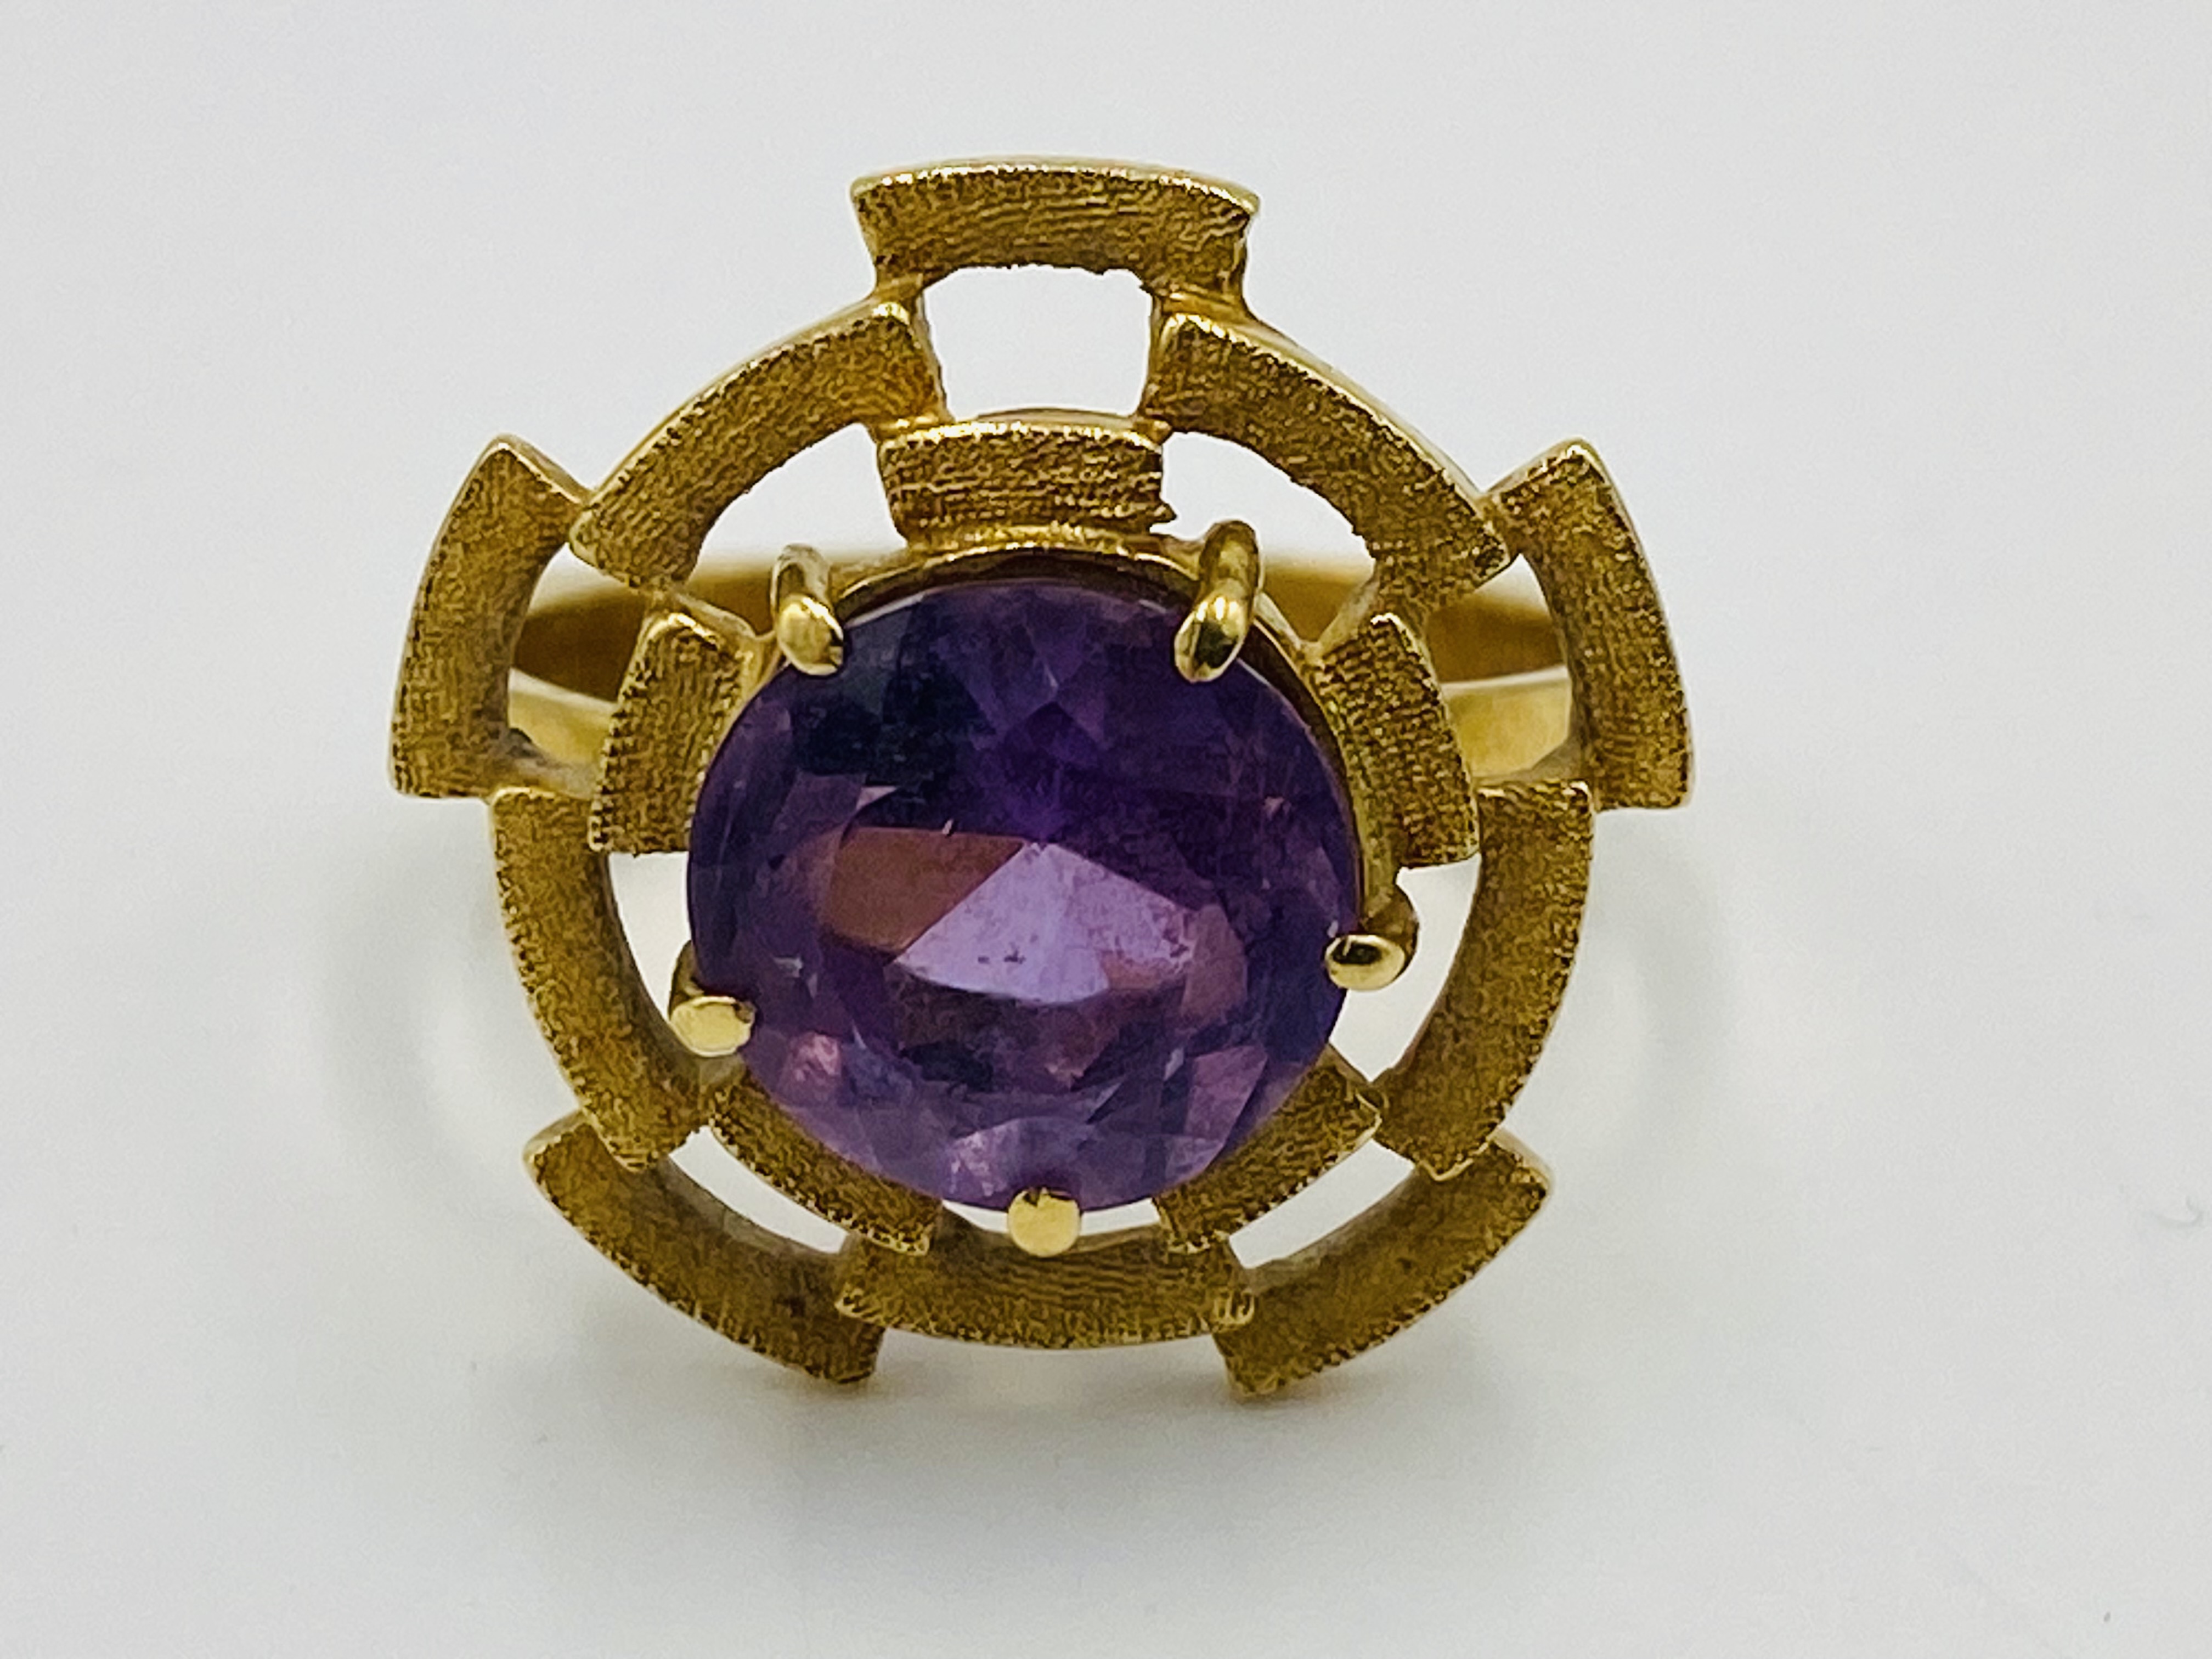 1970's 18ct gold ring with central amethyst stone